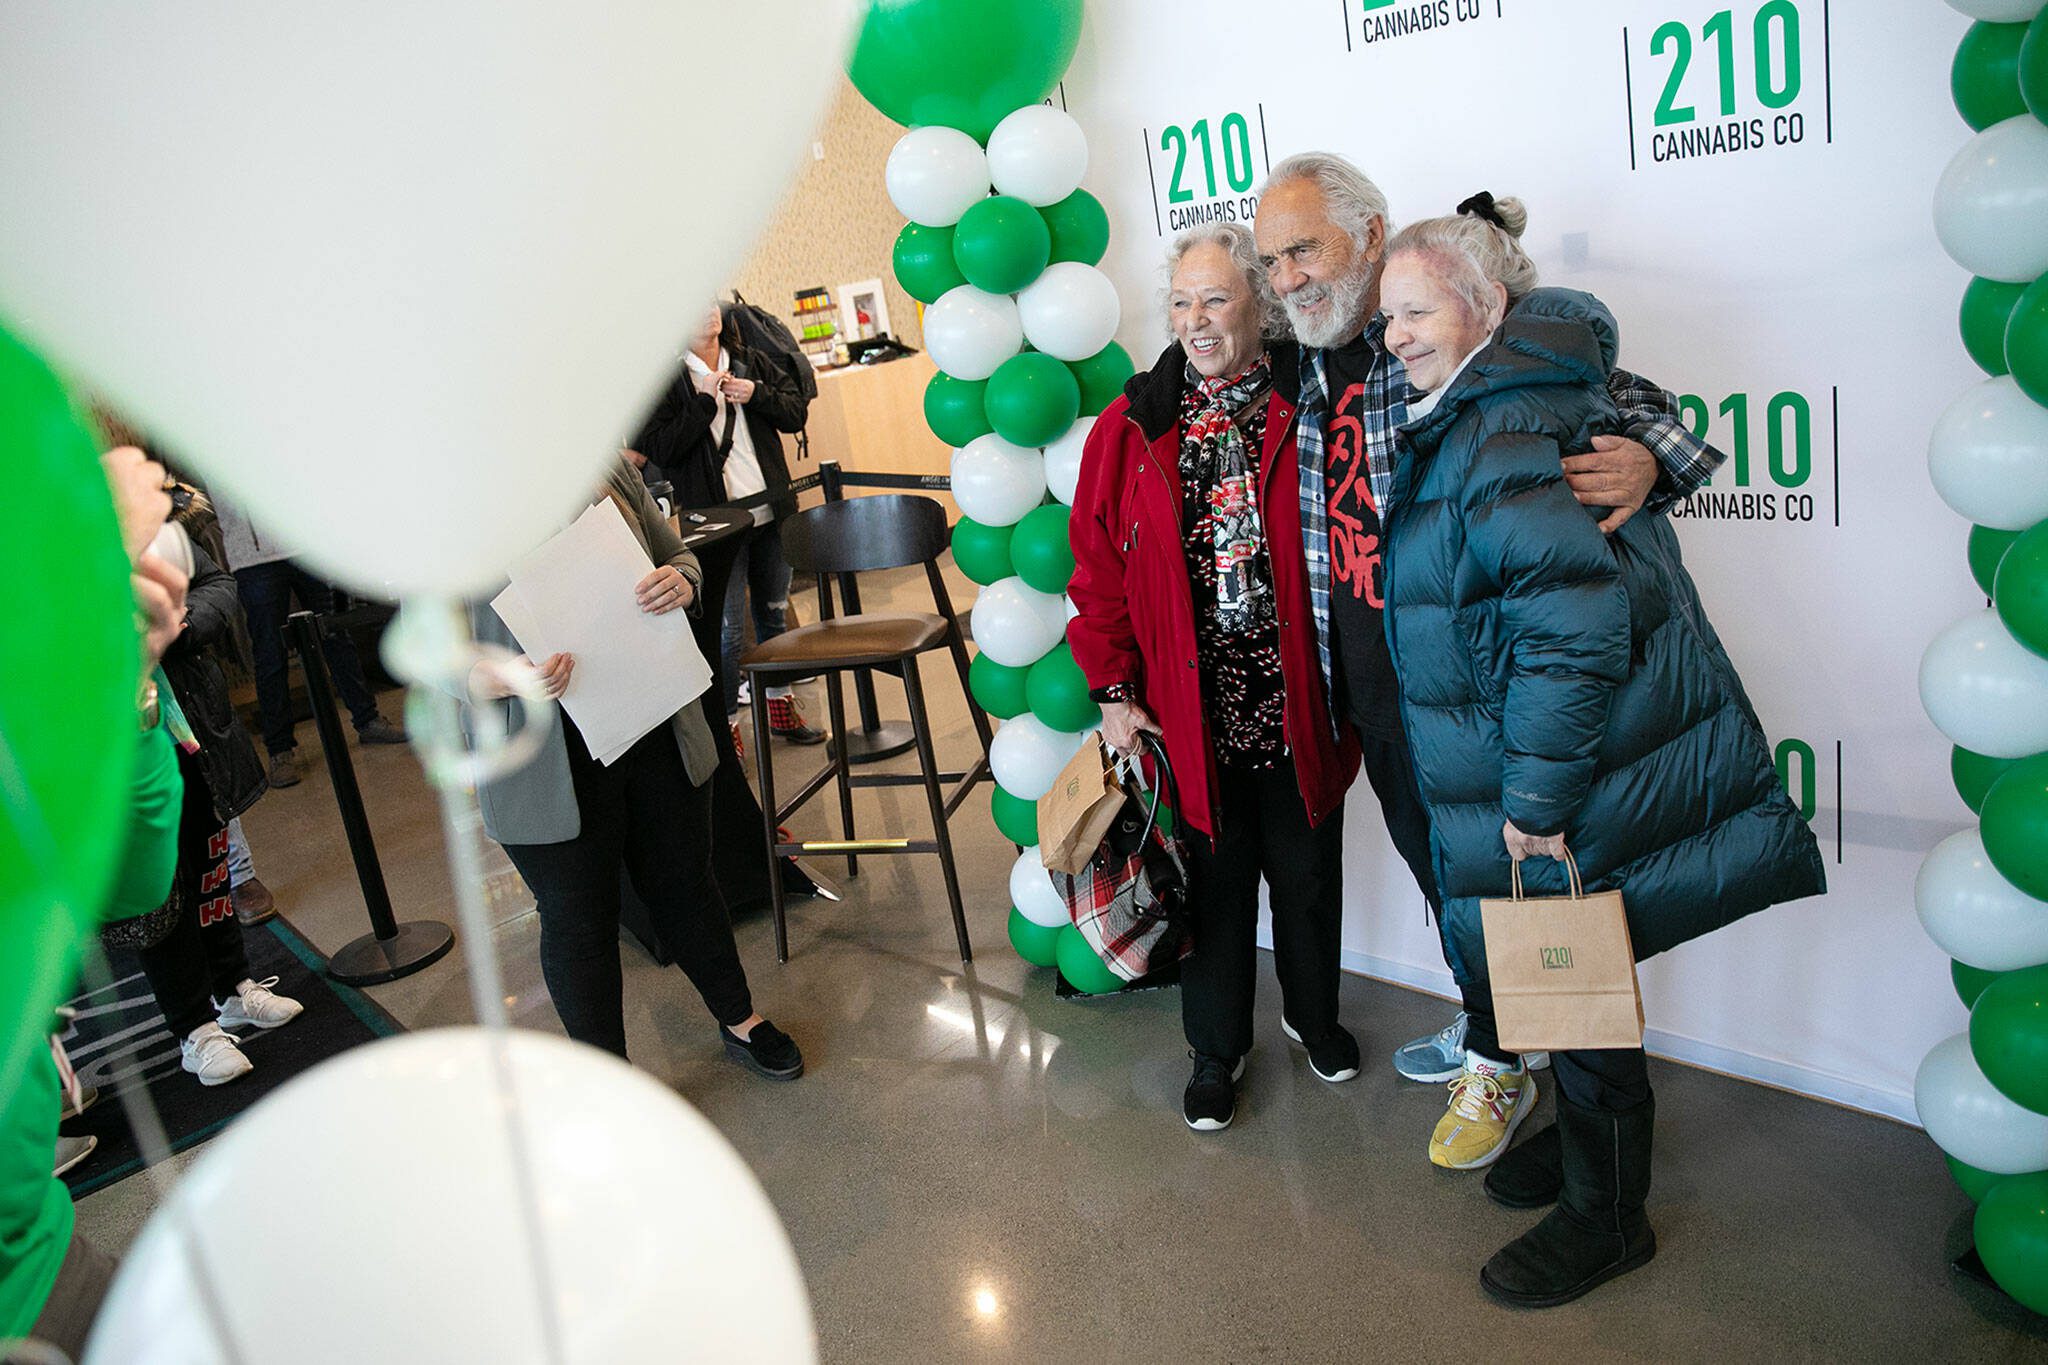 Carla Fisher and Lana Lasley take a photo together with Tommy Chong during 210 Cannabis Co’s grand opening Dec. 10, in Arlington. Fisher and Lasley waited in line solely to get a photo with Chong. (Ryan Berry / The Herald)